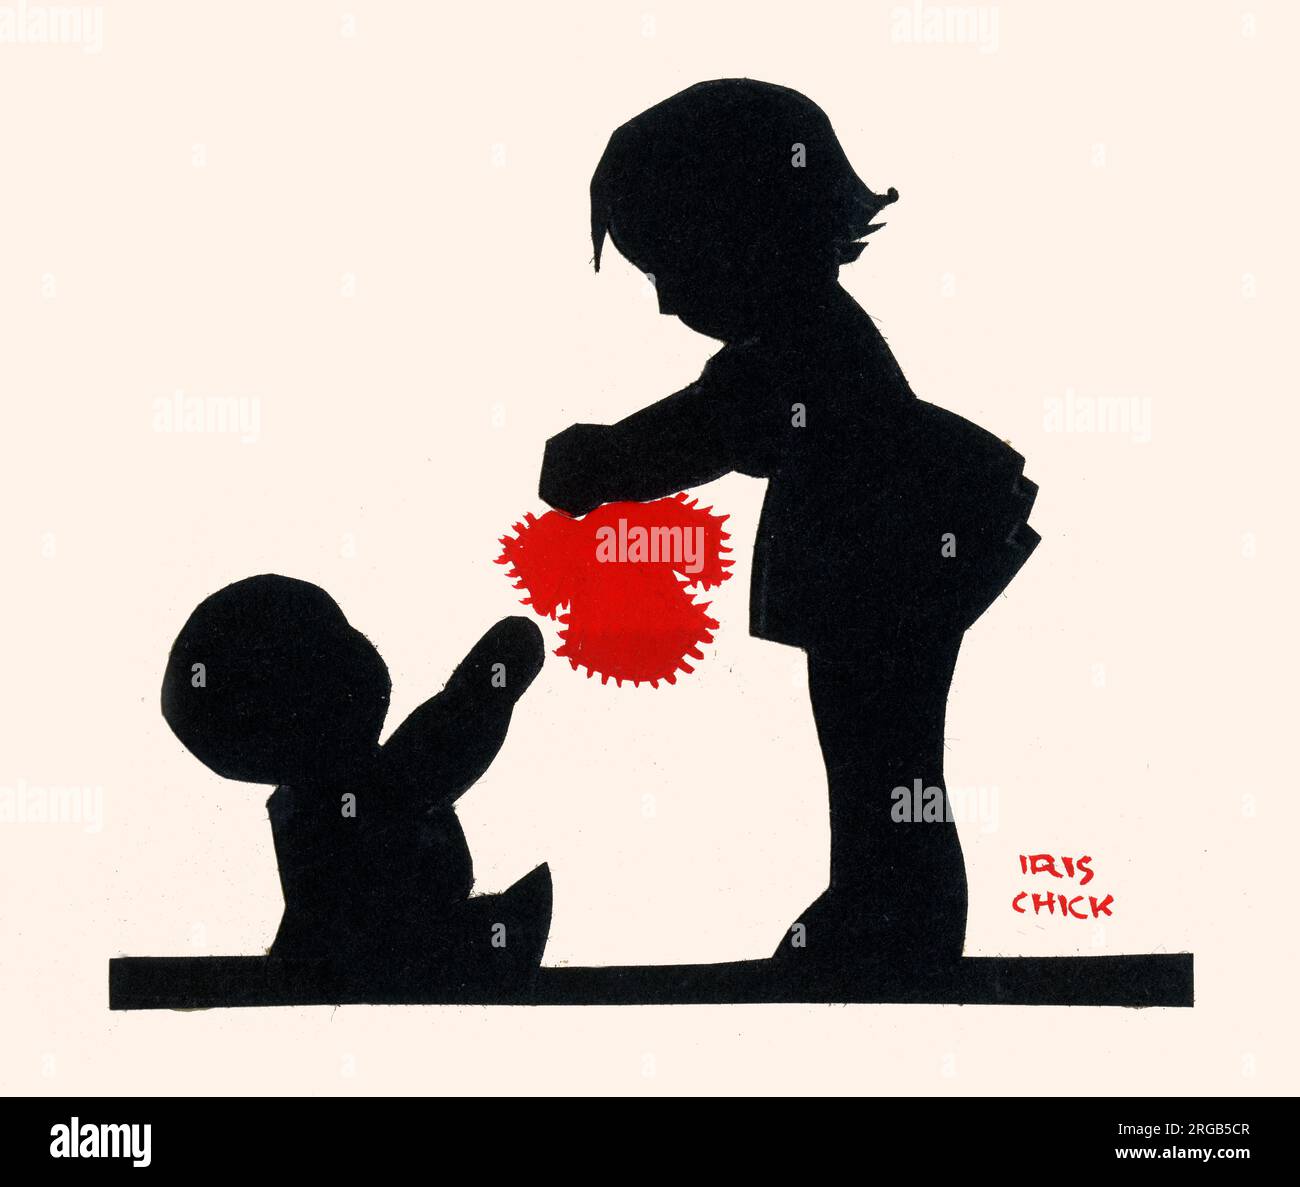 Original silhouette artwork - A little girl gives a small red outfit to her baby sister. Stock Photo